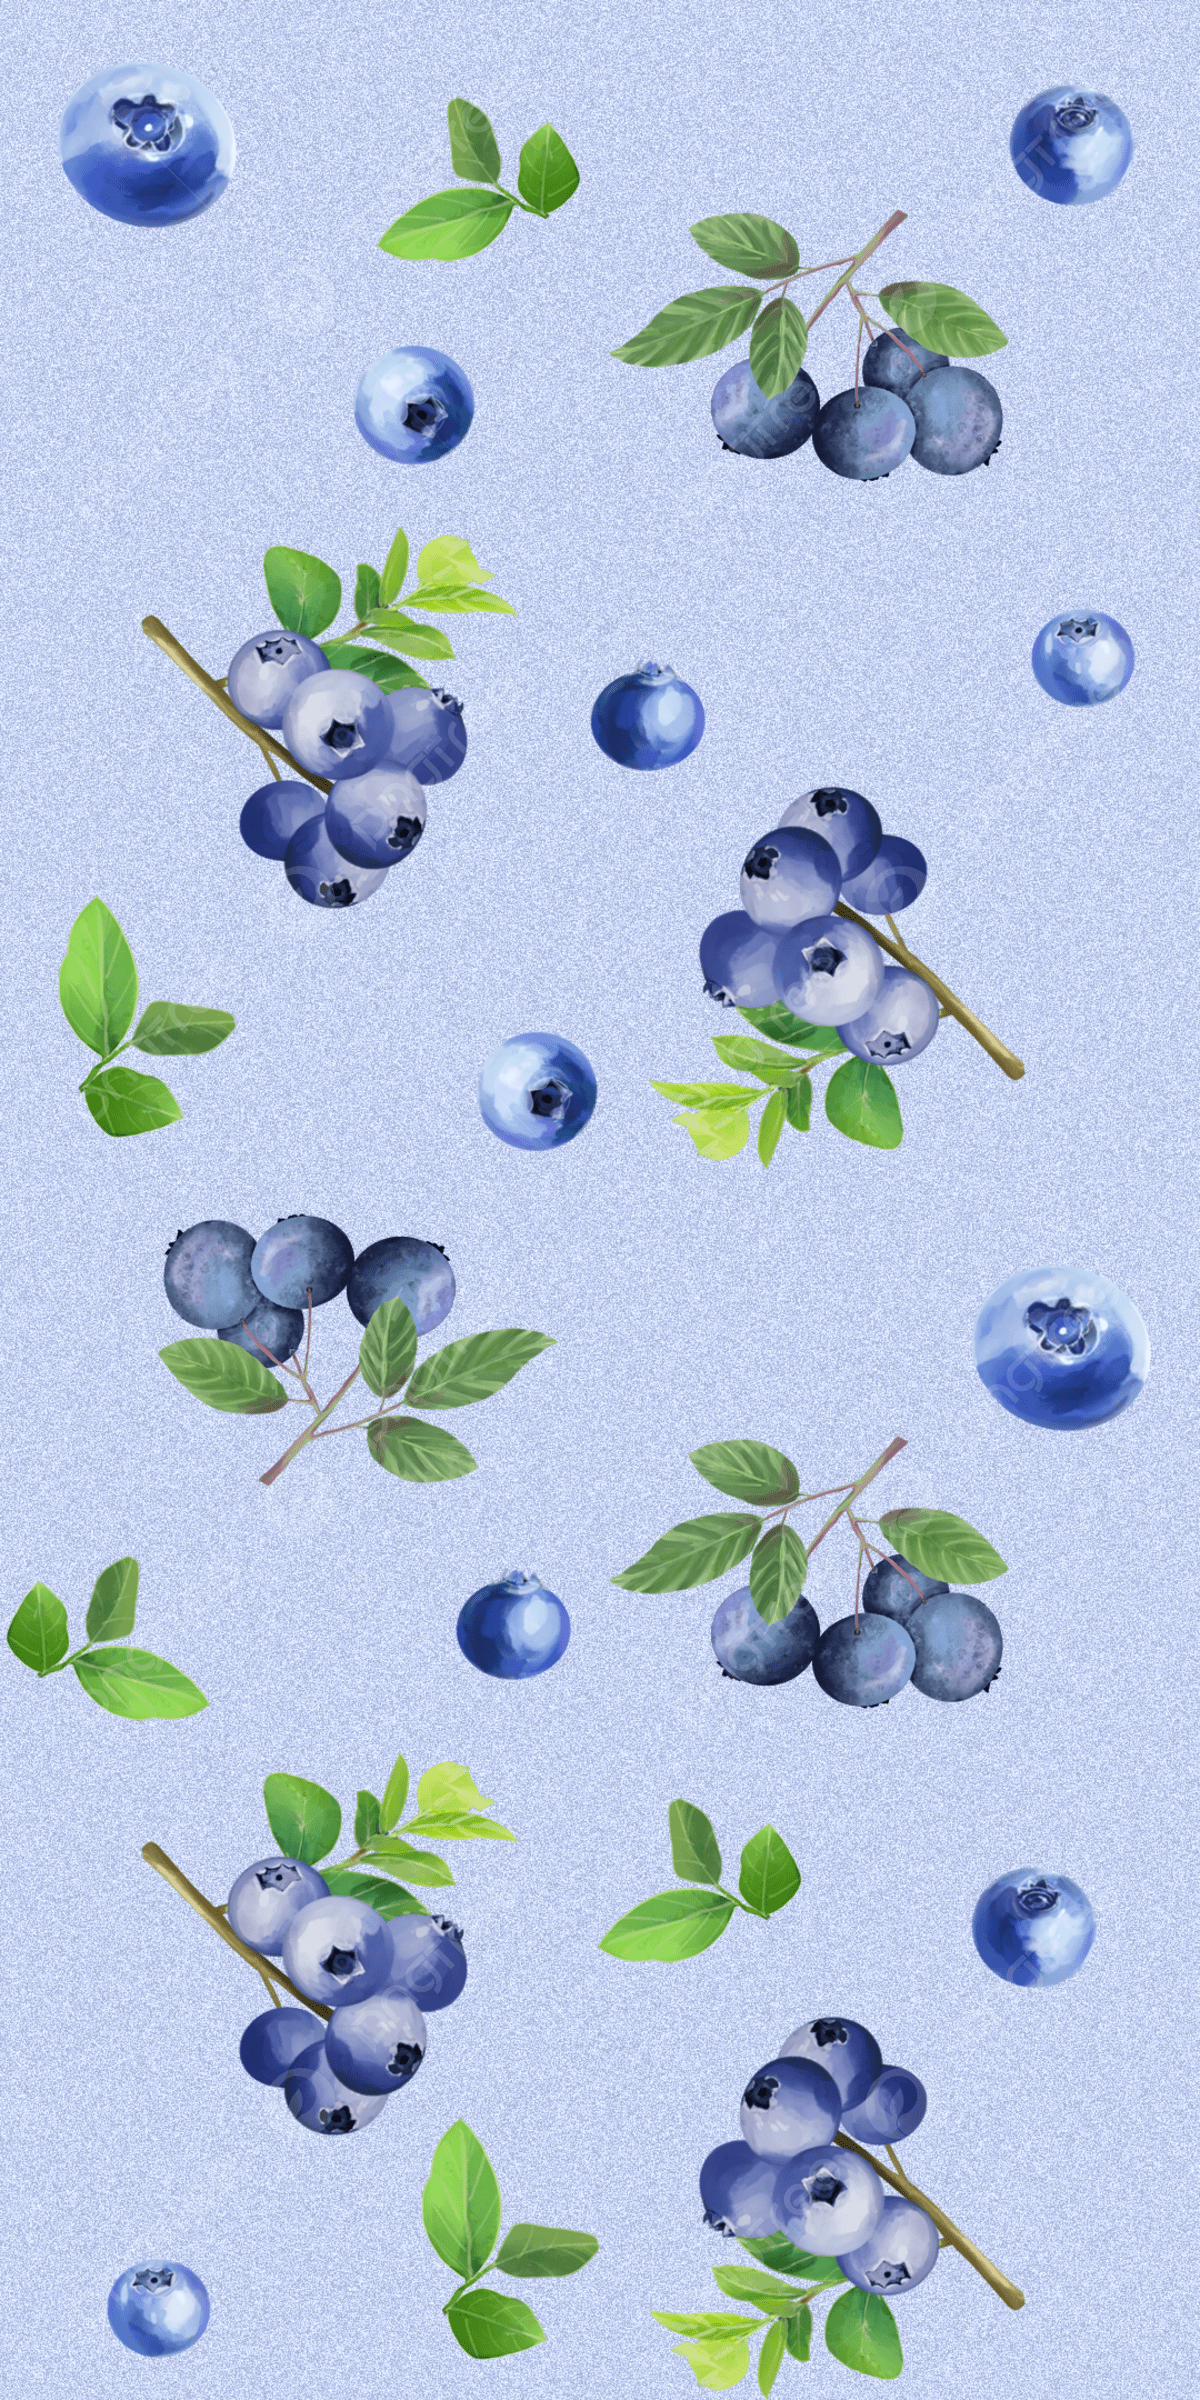 Blueberries are falling from the sky - Watercolor